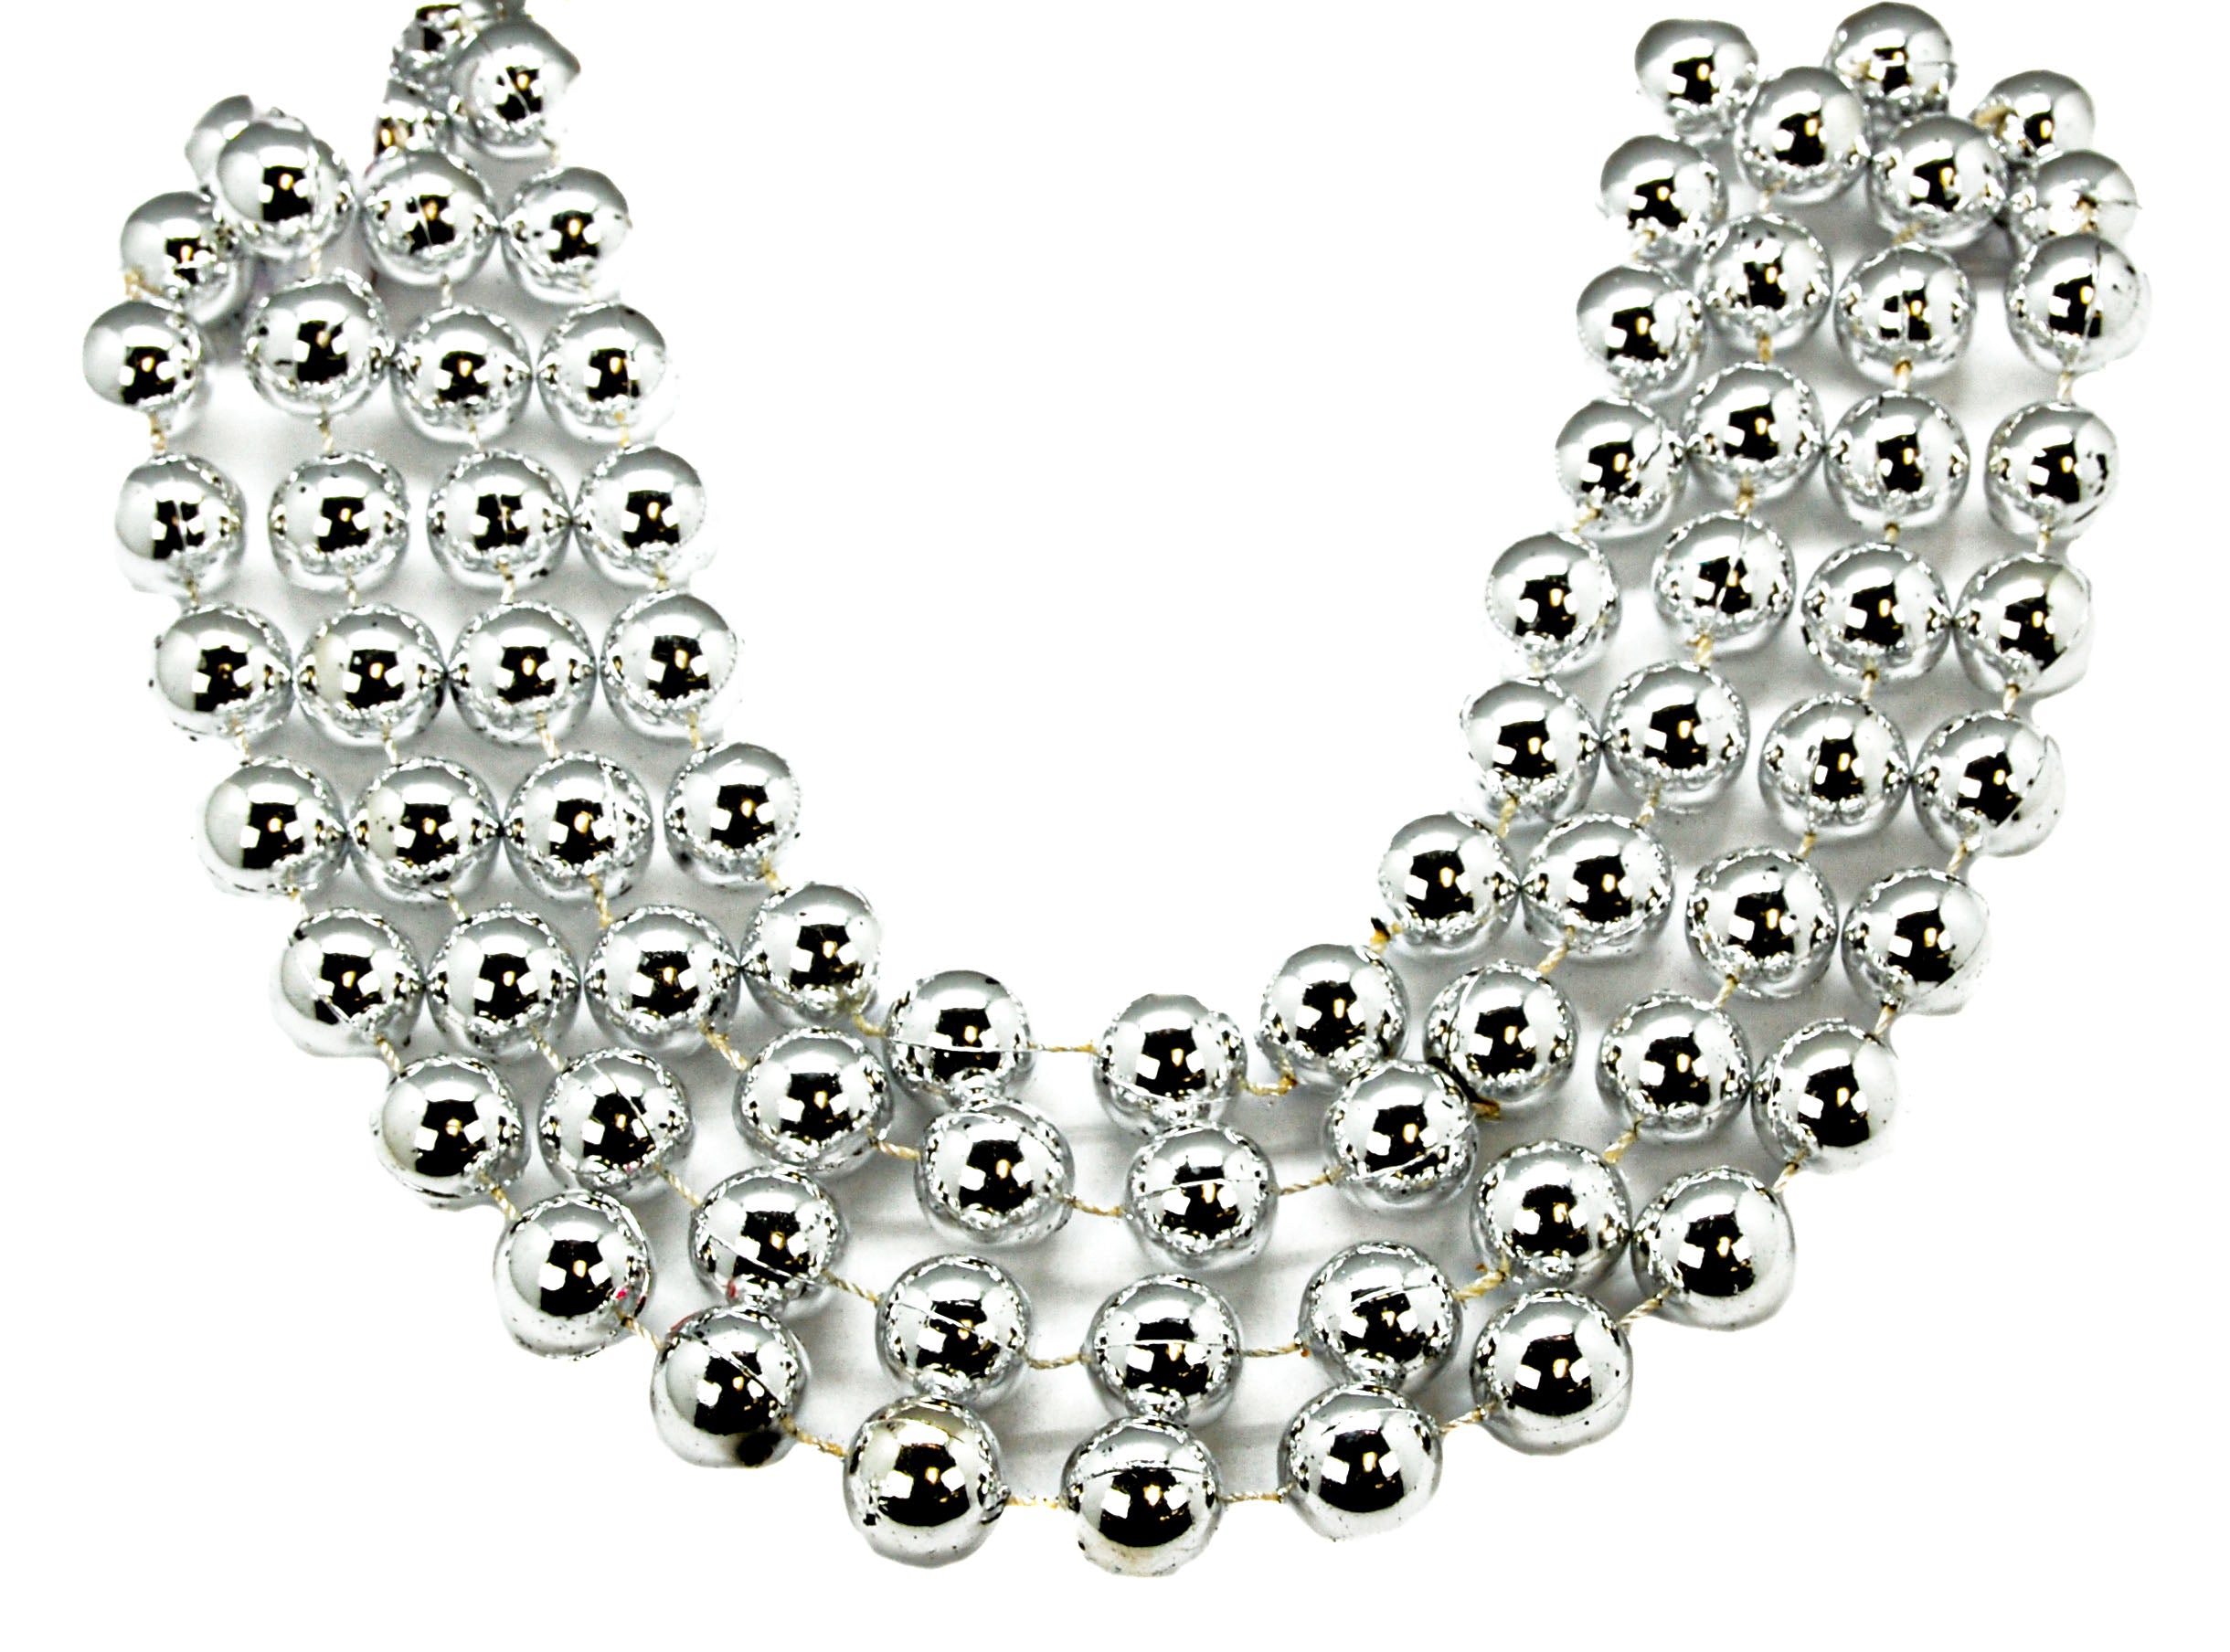 48" 18mm Round Beads Silver